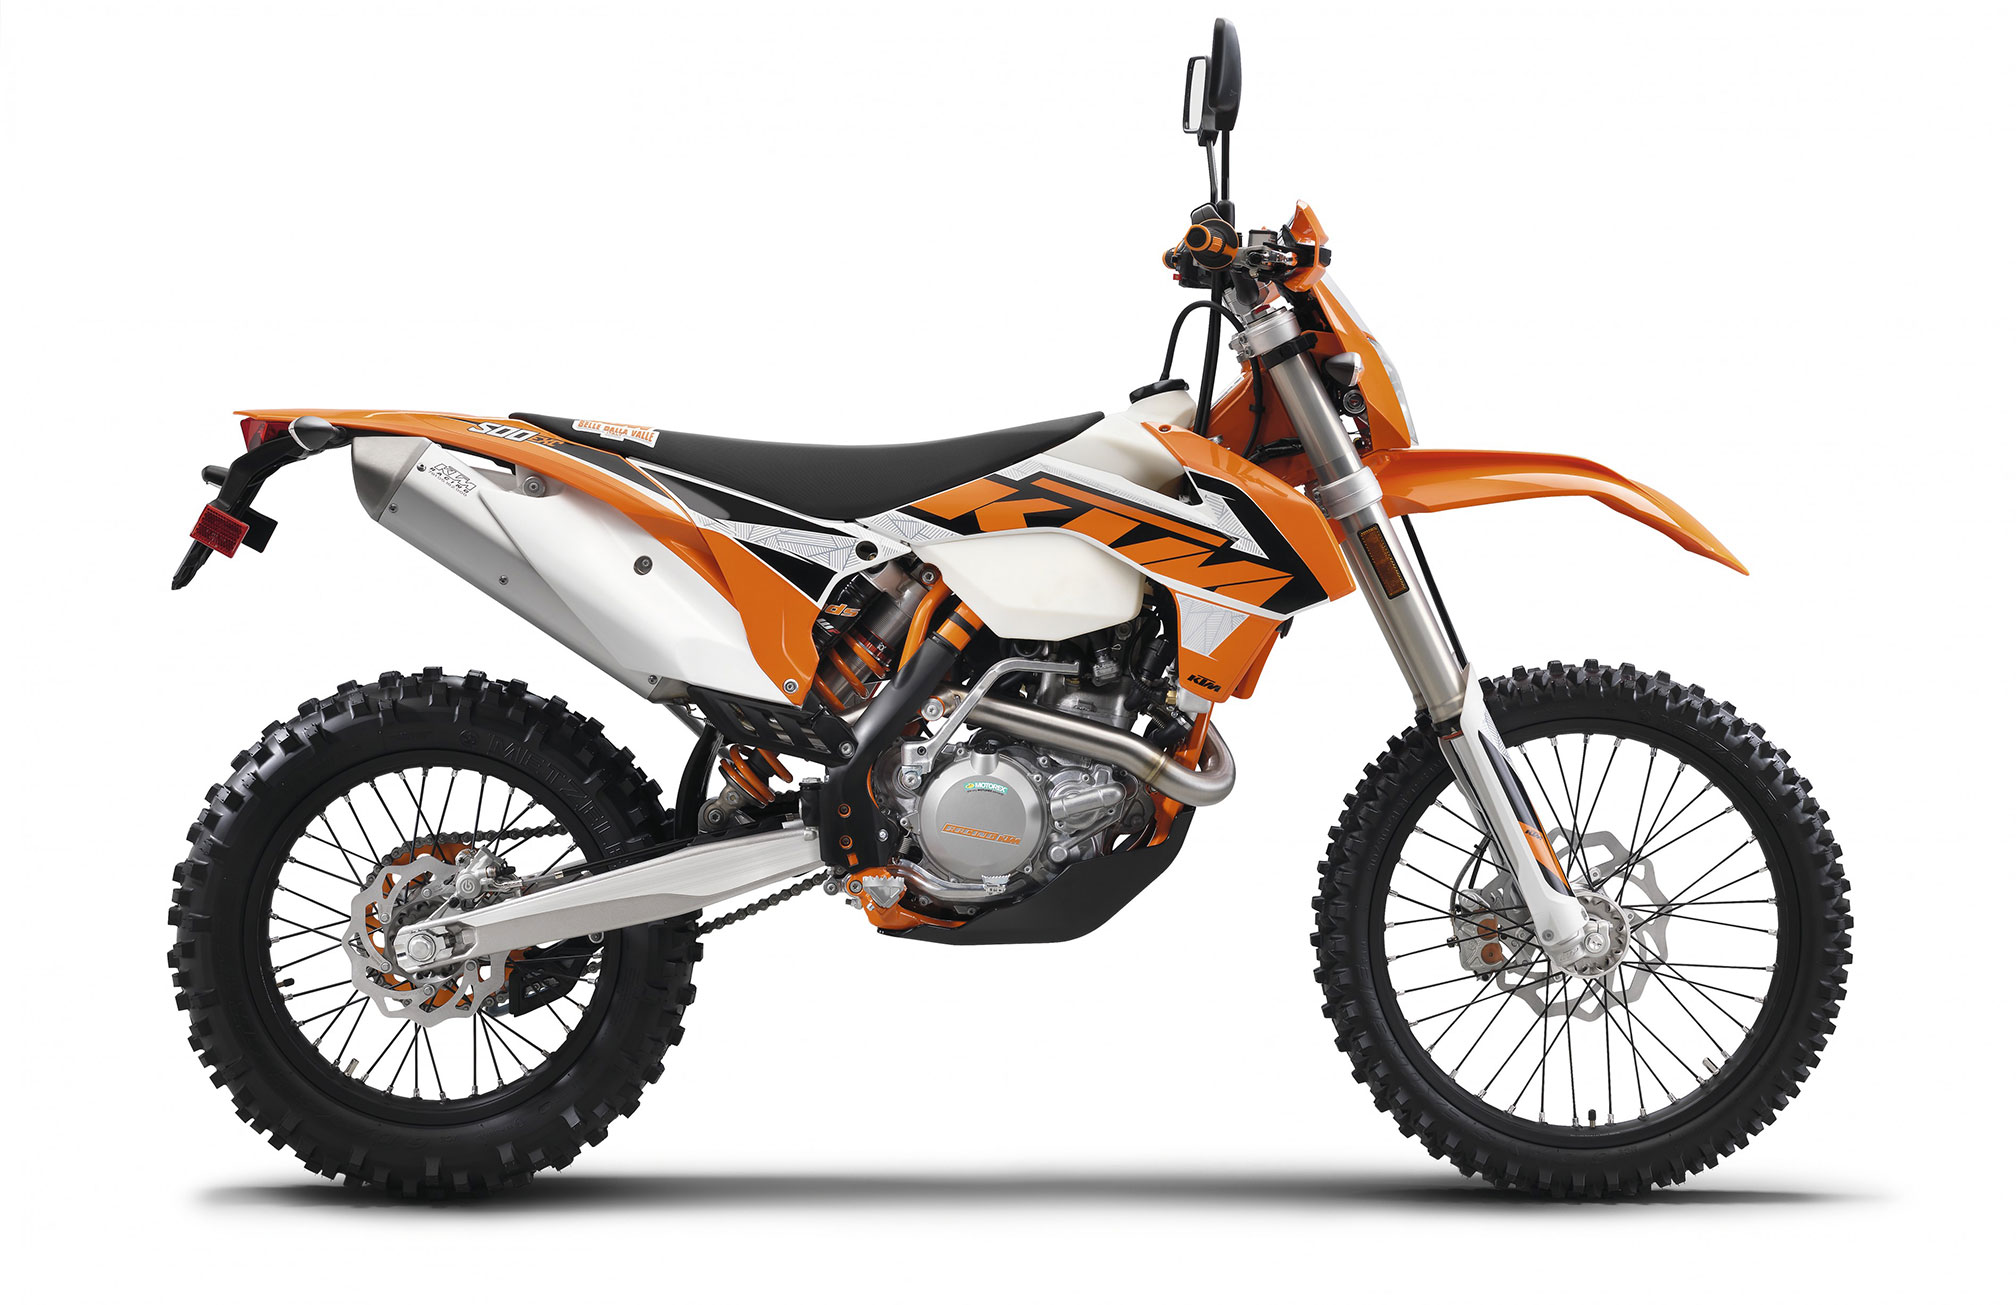 2016 KTM 500 EXC Review